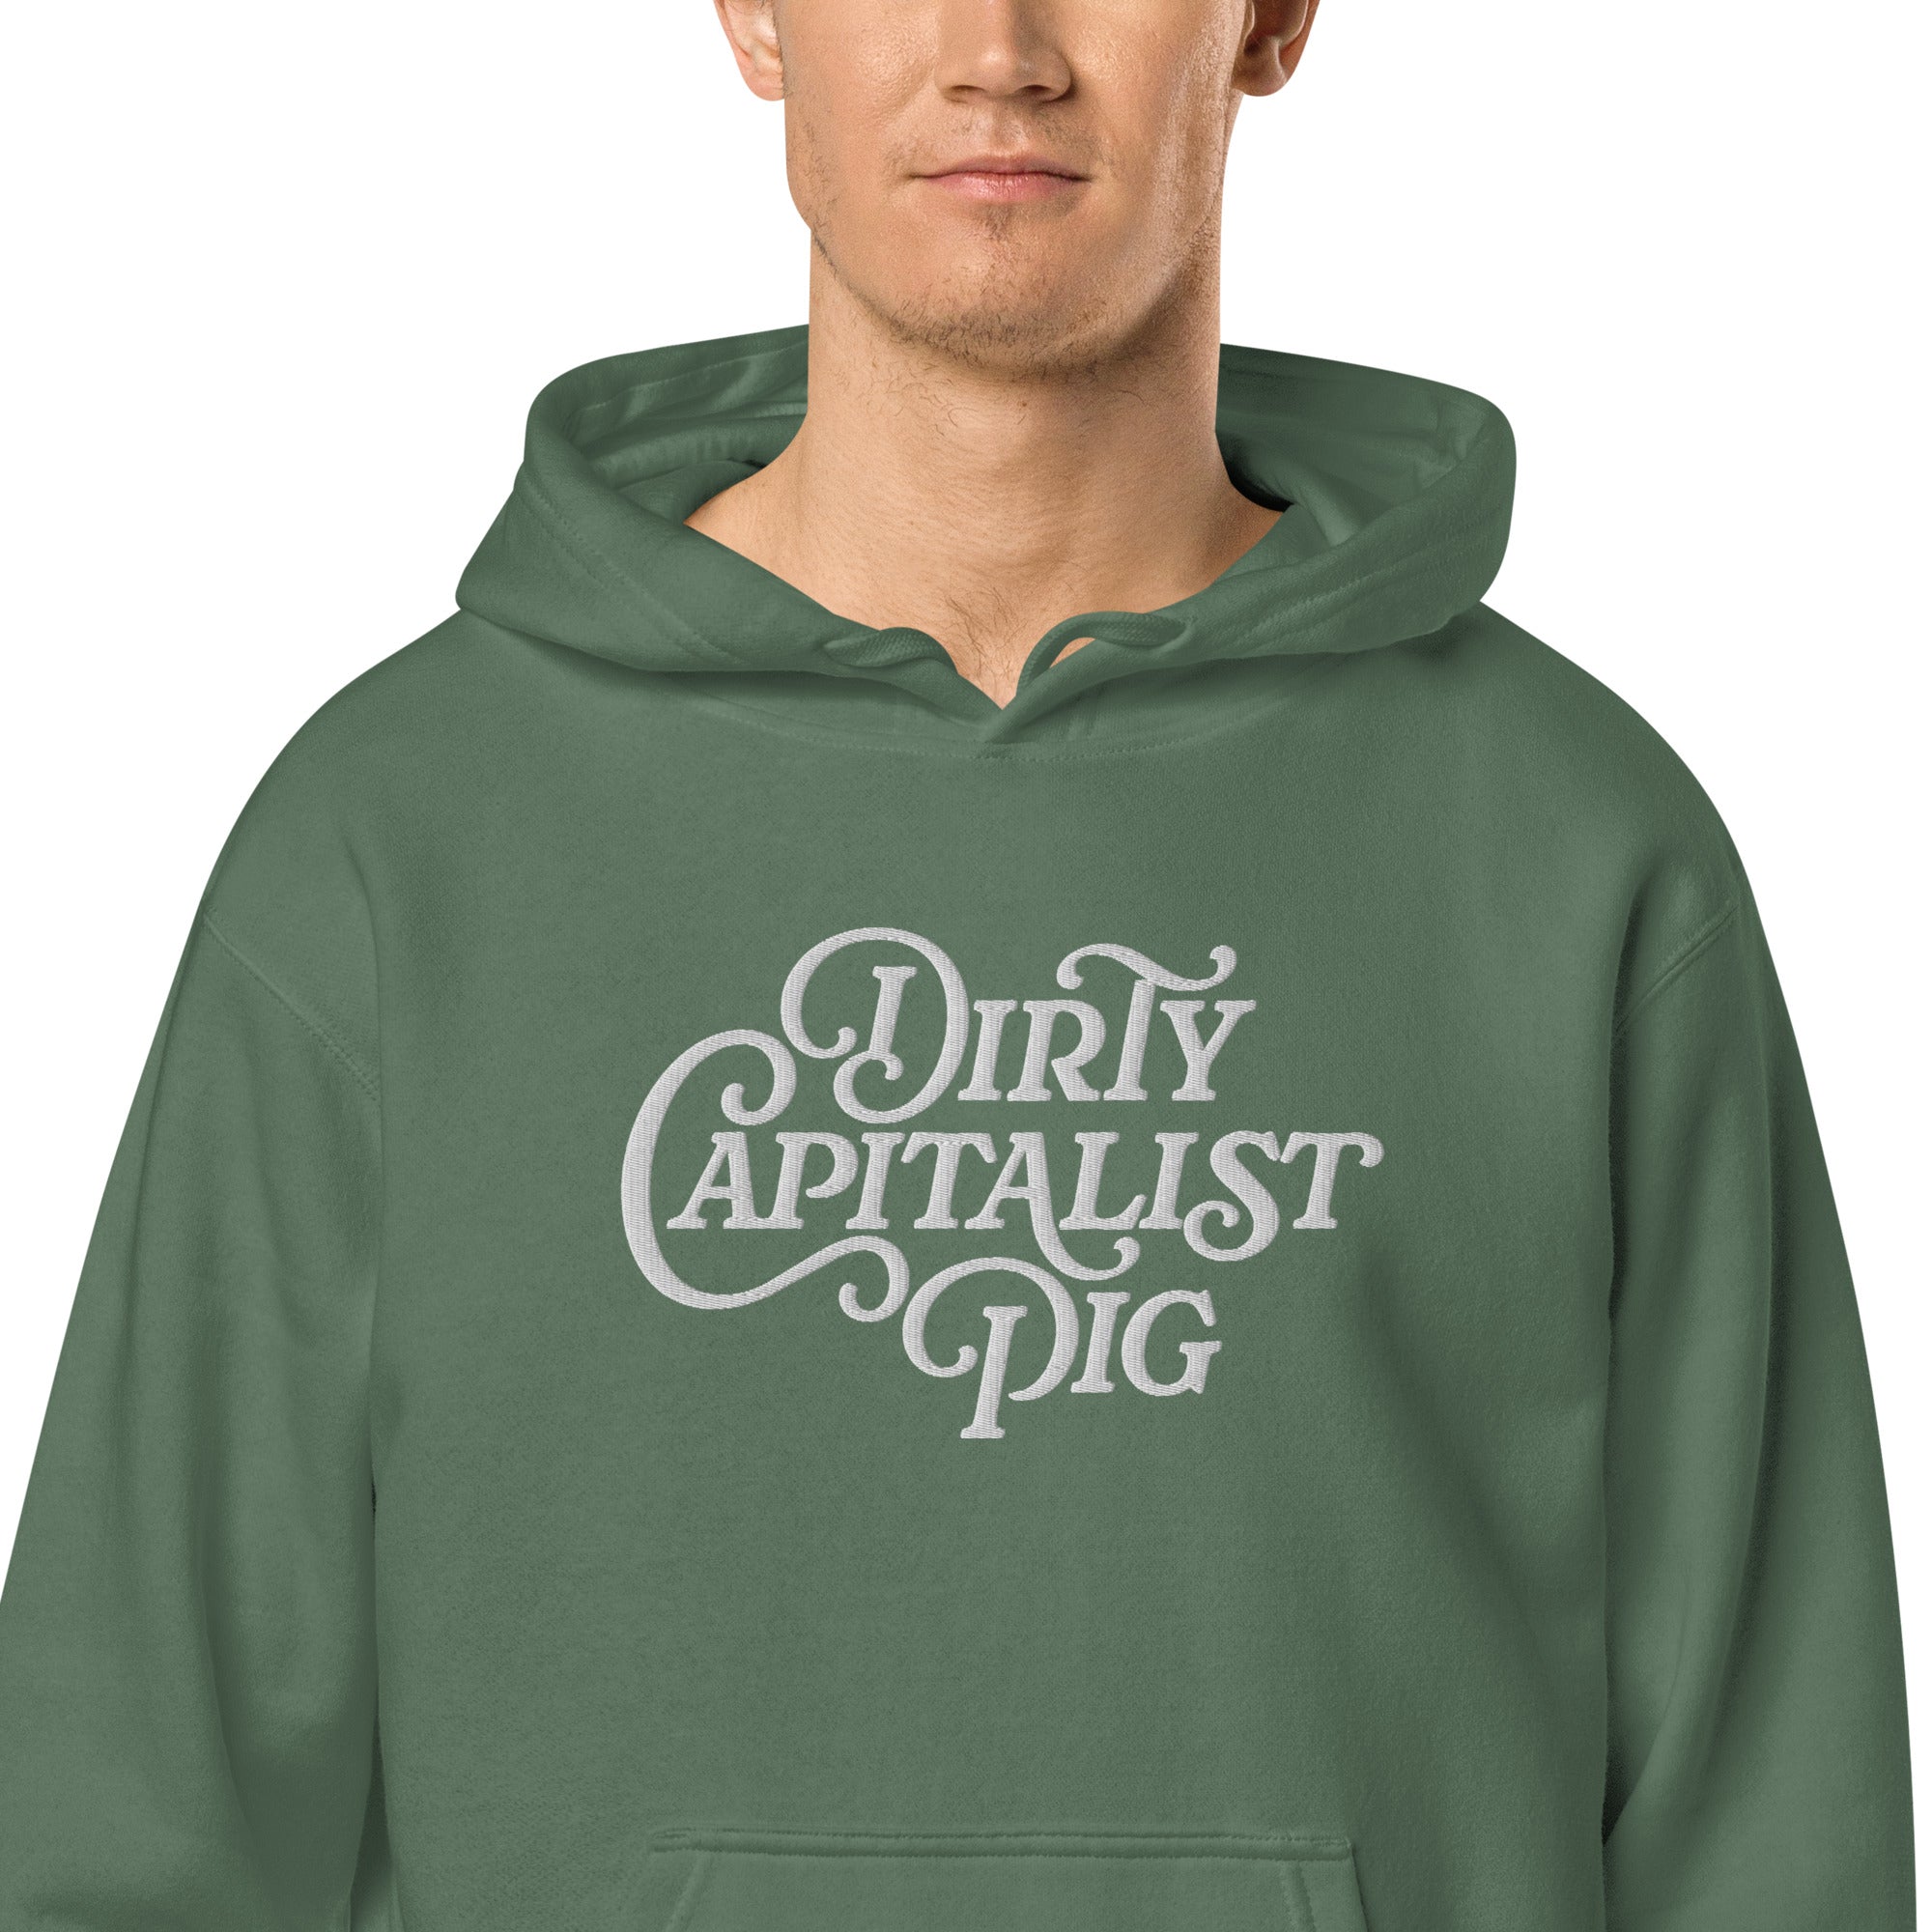 Dirty Capitalist Pig Pigment-dyed Embroidered Pullover Hoodie